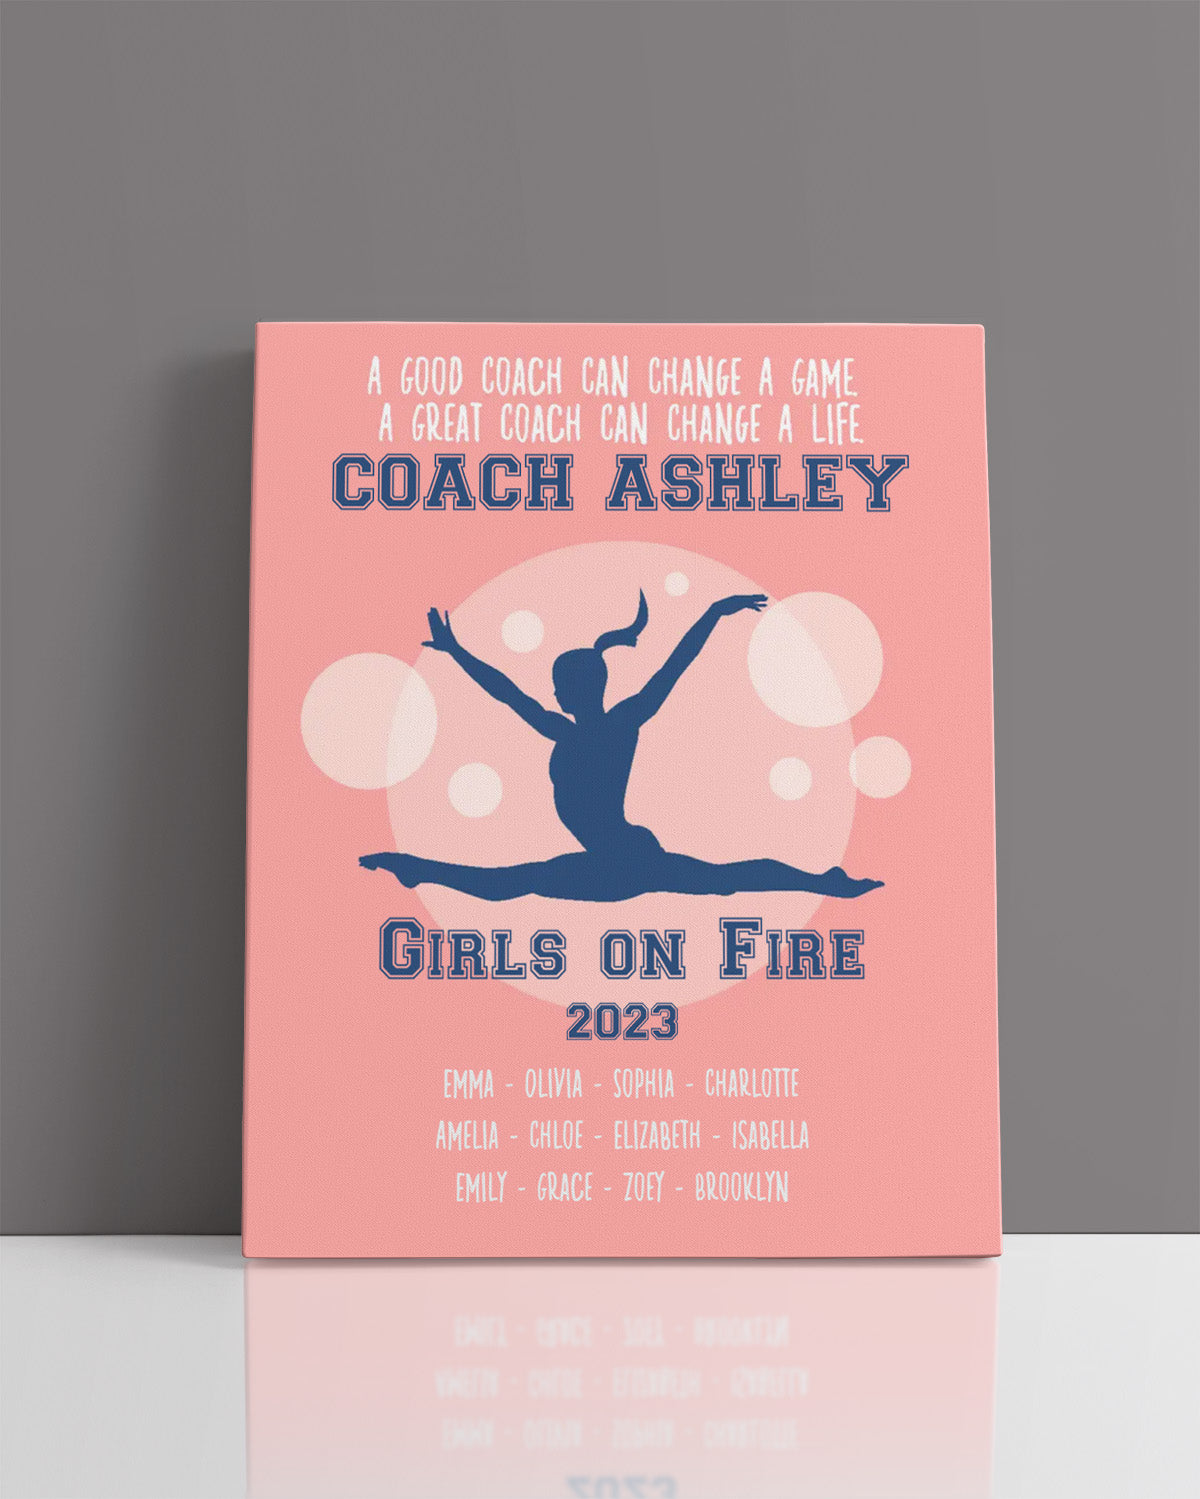 Gymnastics Coach Appreciation Gift - Customize With Athlete Names, Coach's Names, Team Name, Year or Season - Motivational Sports Wall Art - Coach's Quote